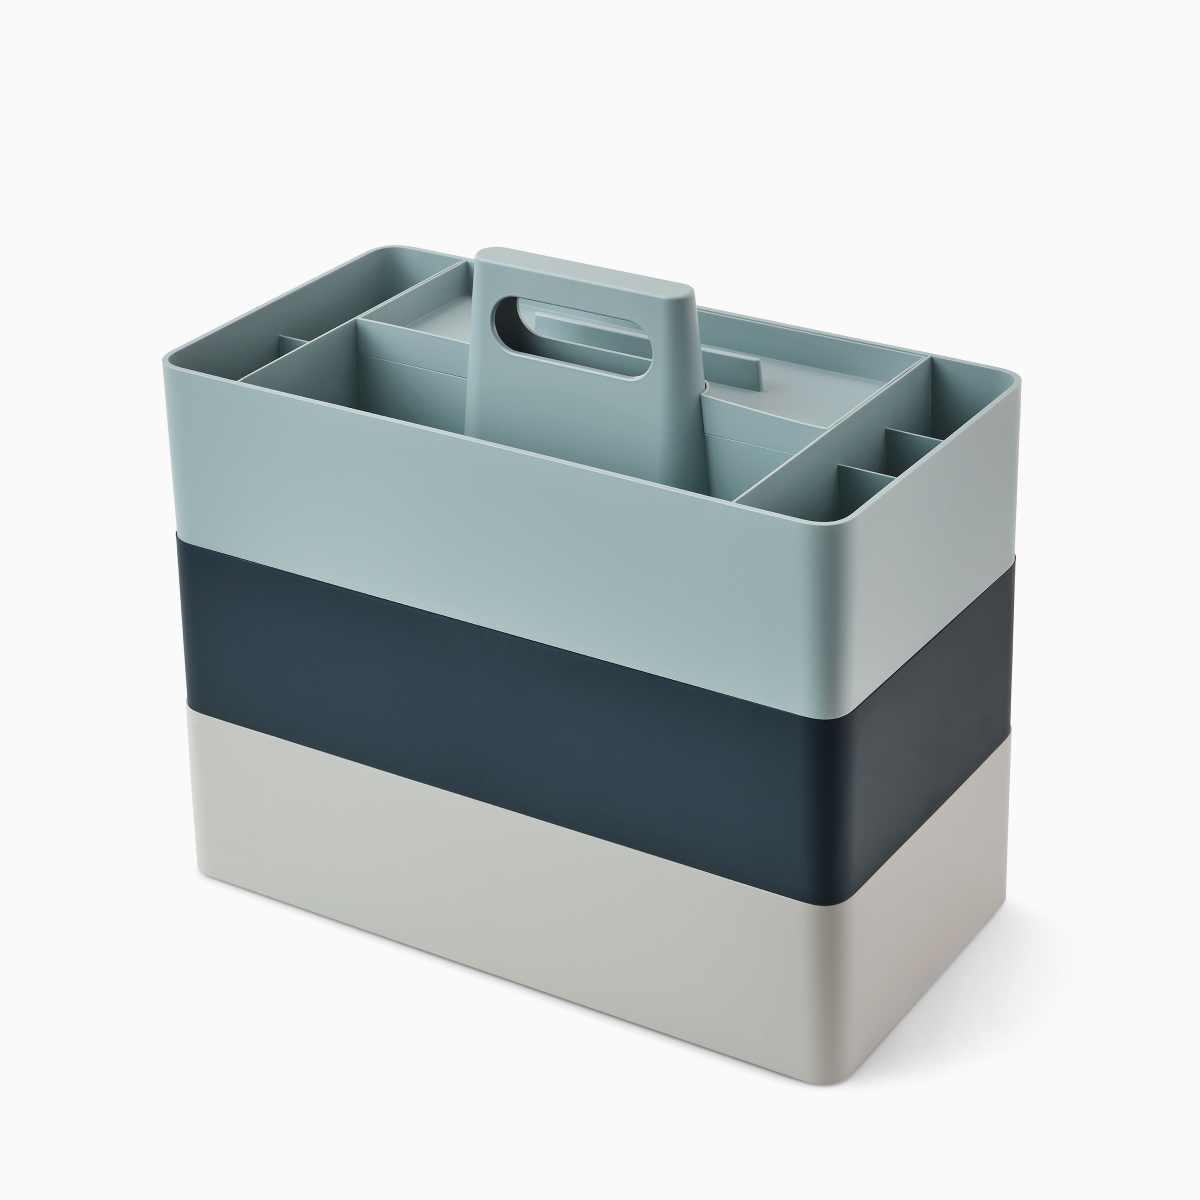 Grey, dark blue and light blue OE1 Workbox storage boxes stacked on top of each other, viewed from an angle.